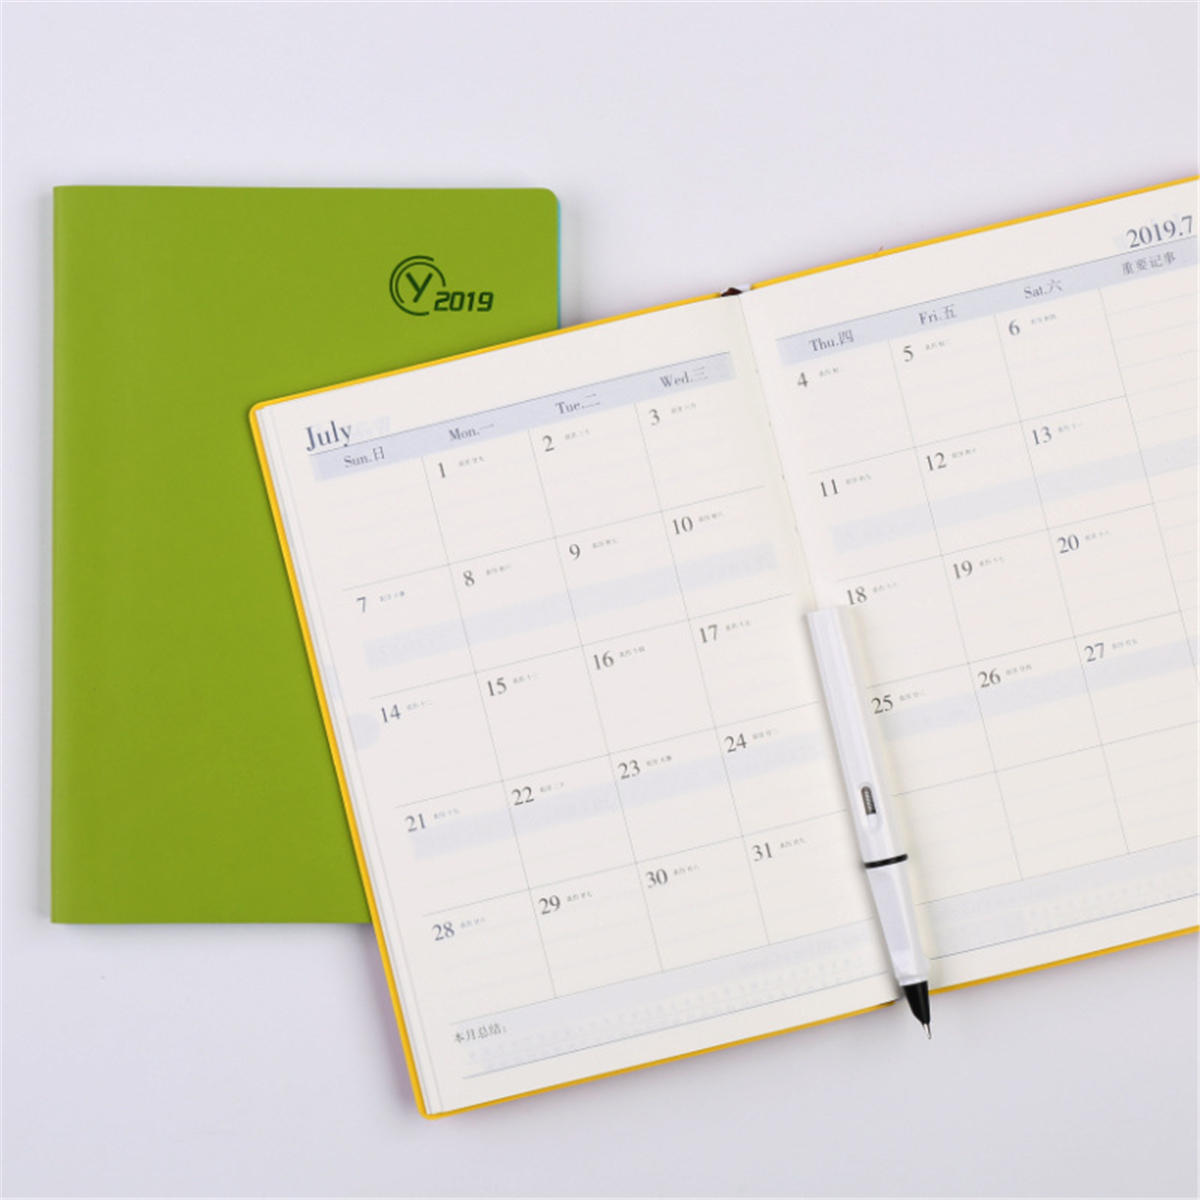 2019-2020-Weekly-Monthly-Journal-Planner-Diary-Scheduler-Organizer-Agenda-for-Study-Business-Noteboo-1557216-6